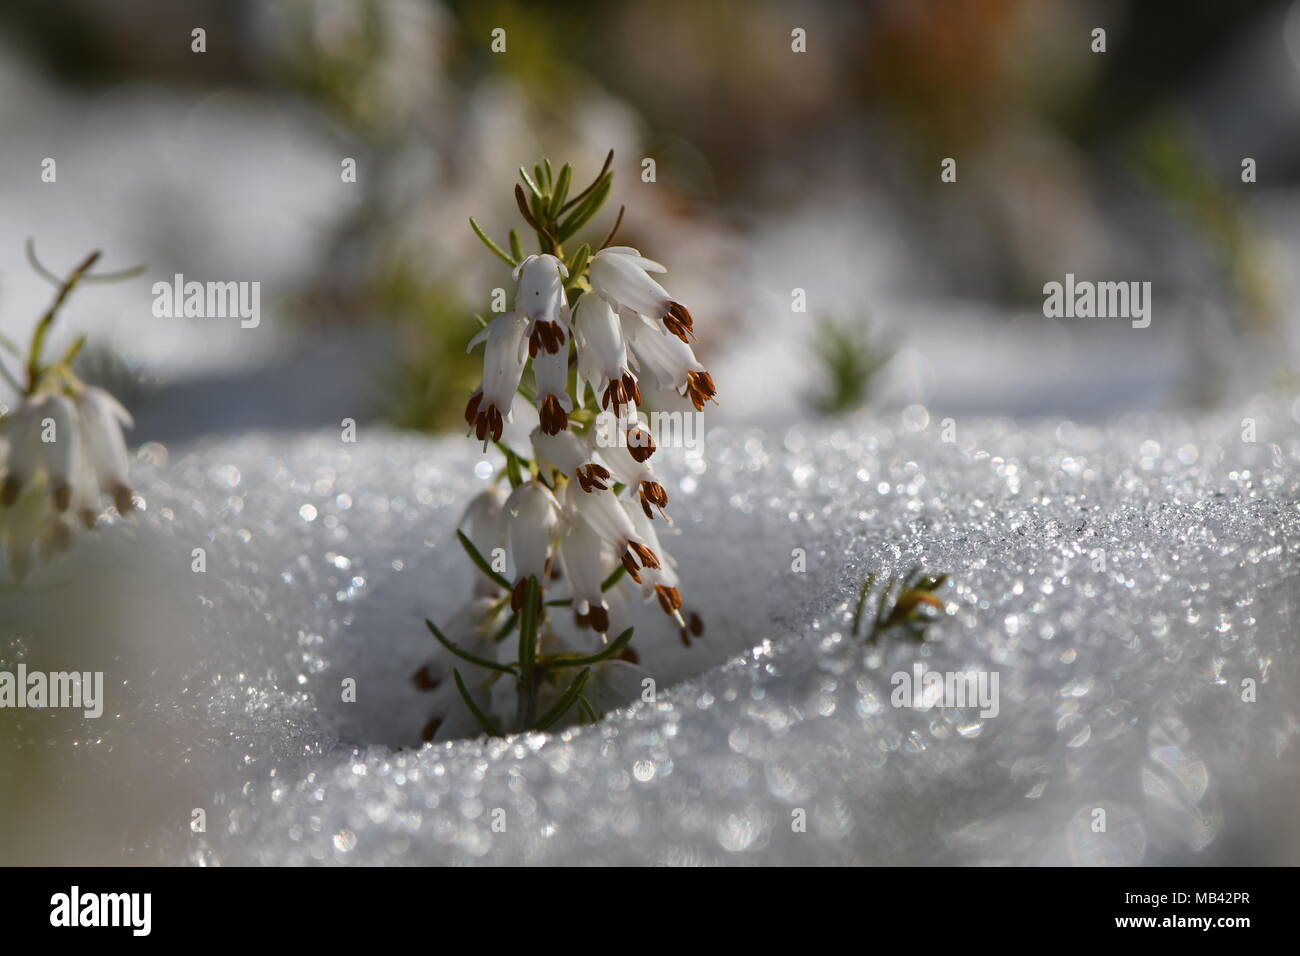 White heather (Erica sp.) flowering through snow. A close-up of white flowers of a common heather plant in the family Ericaceae Stock Photo